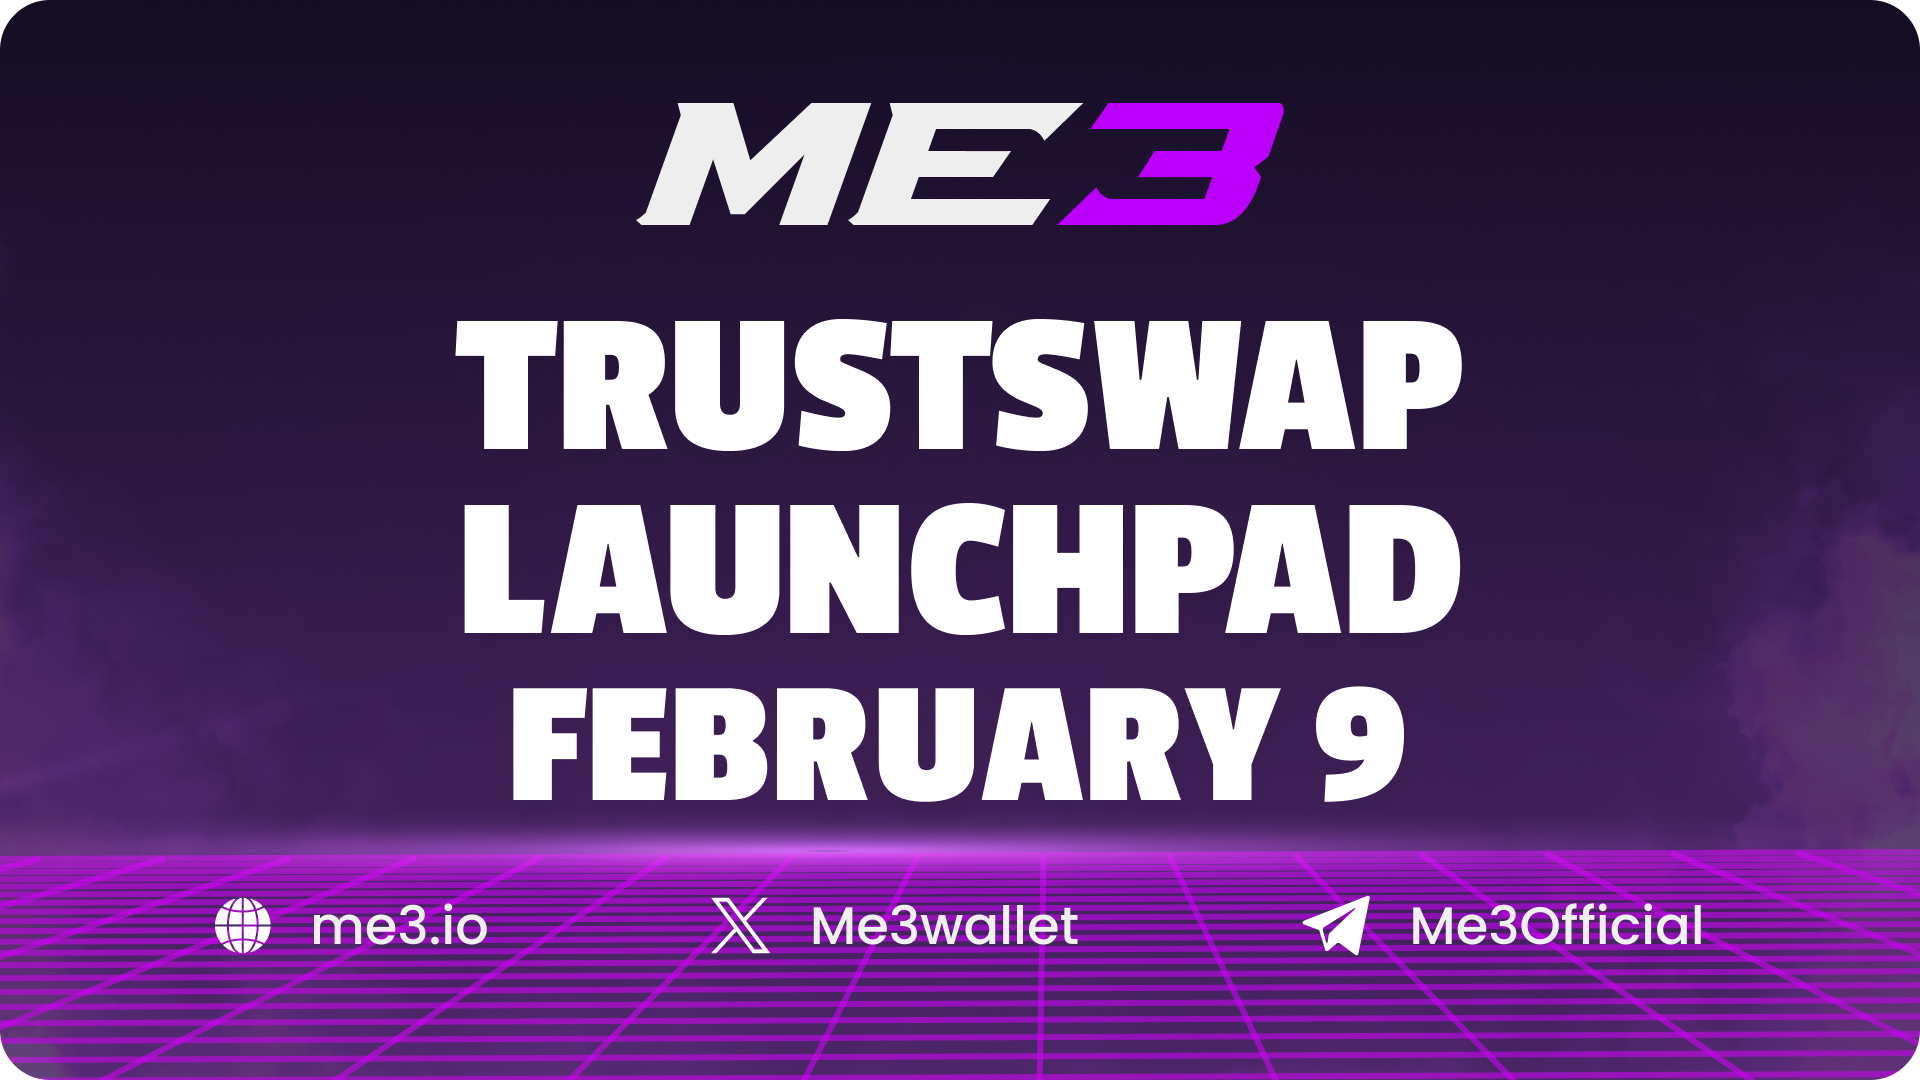 Me3 Announces Dual-Round Token Offering (Private & Public) February 9th on TrustSwap Launchpad